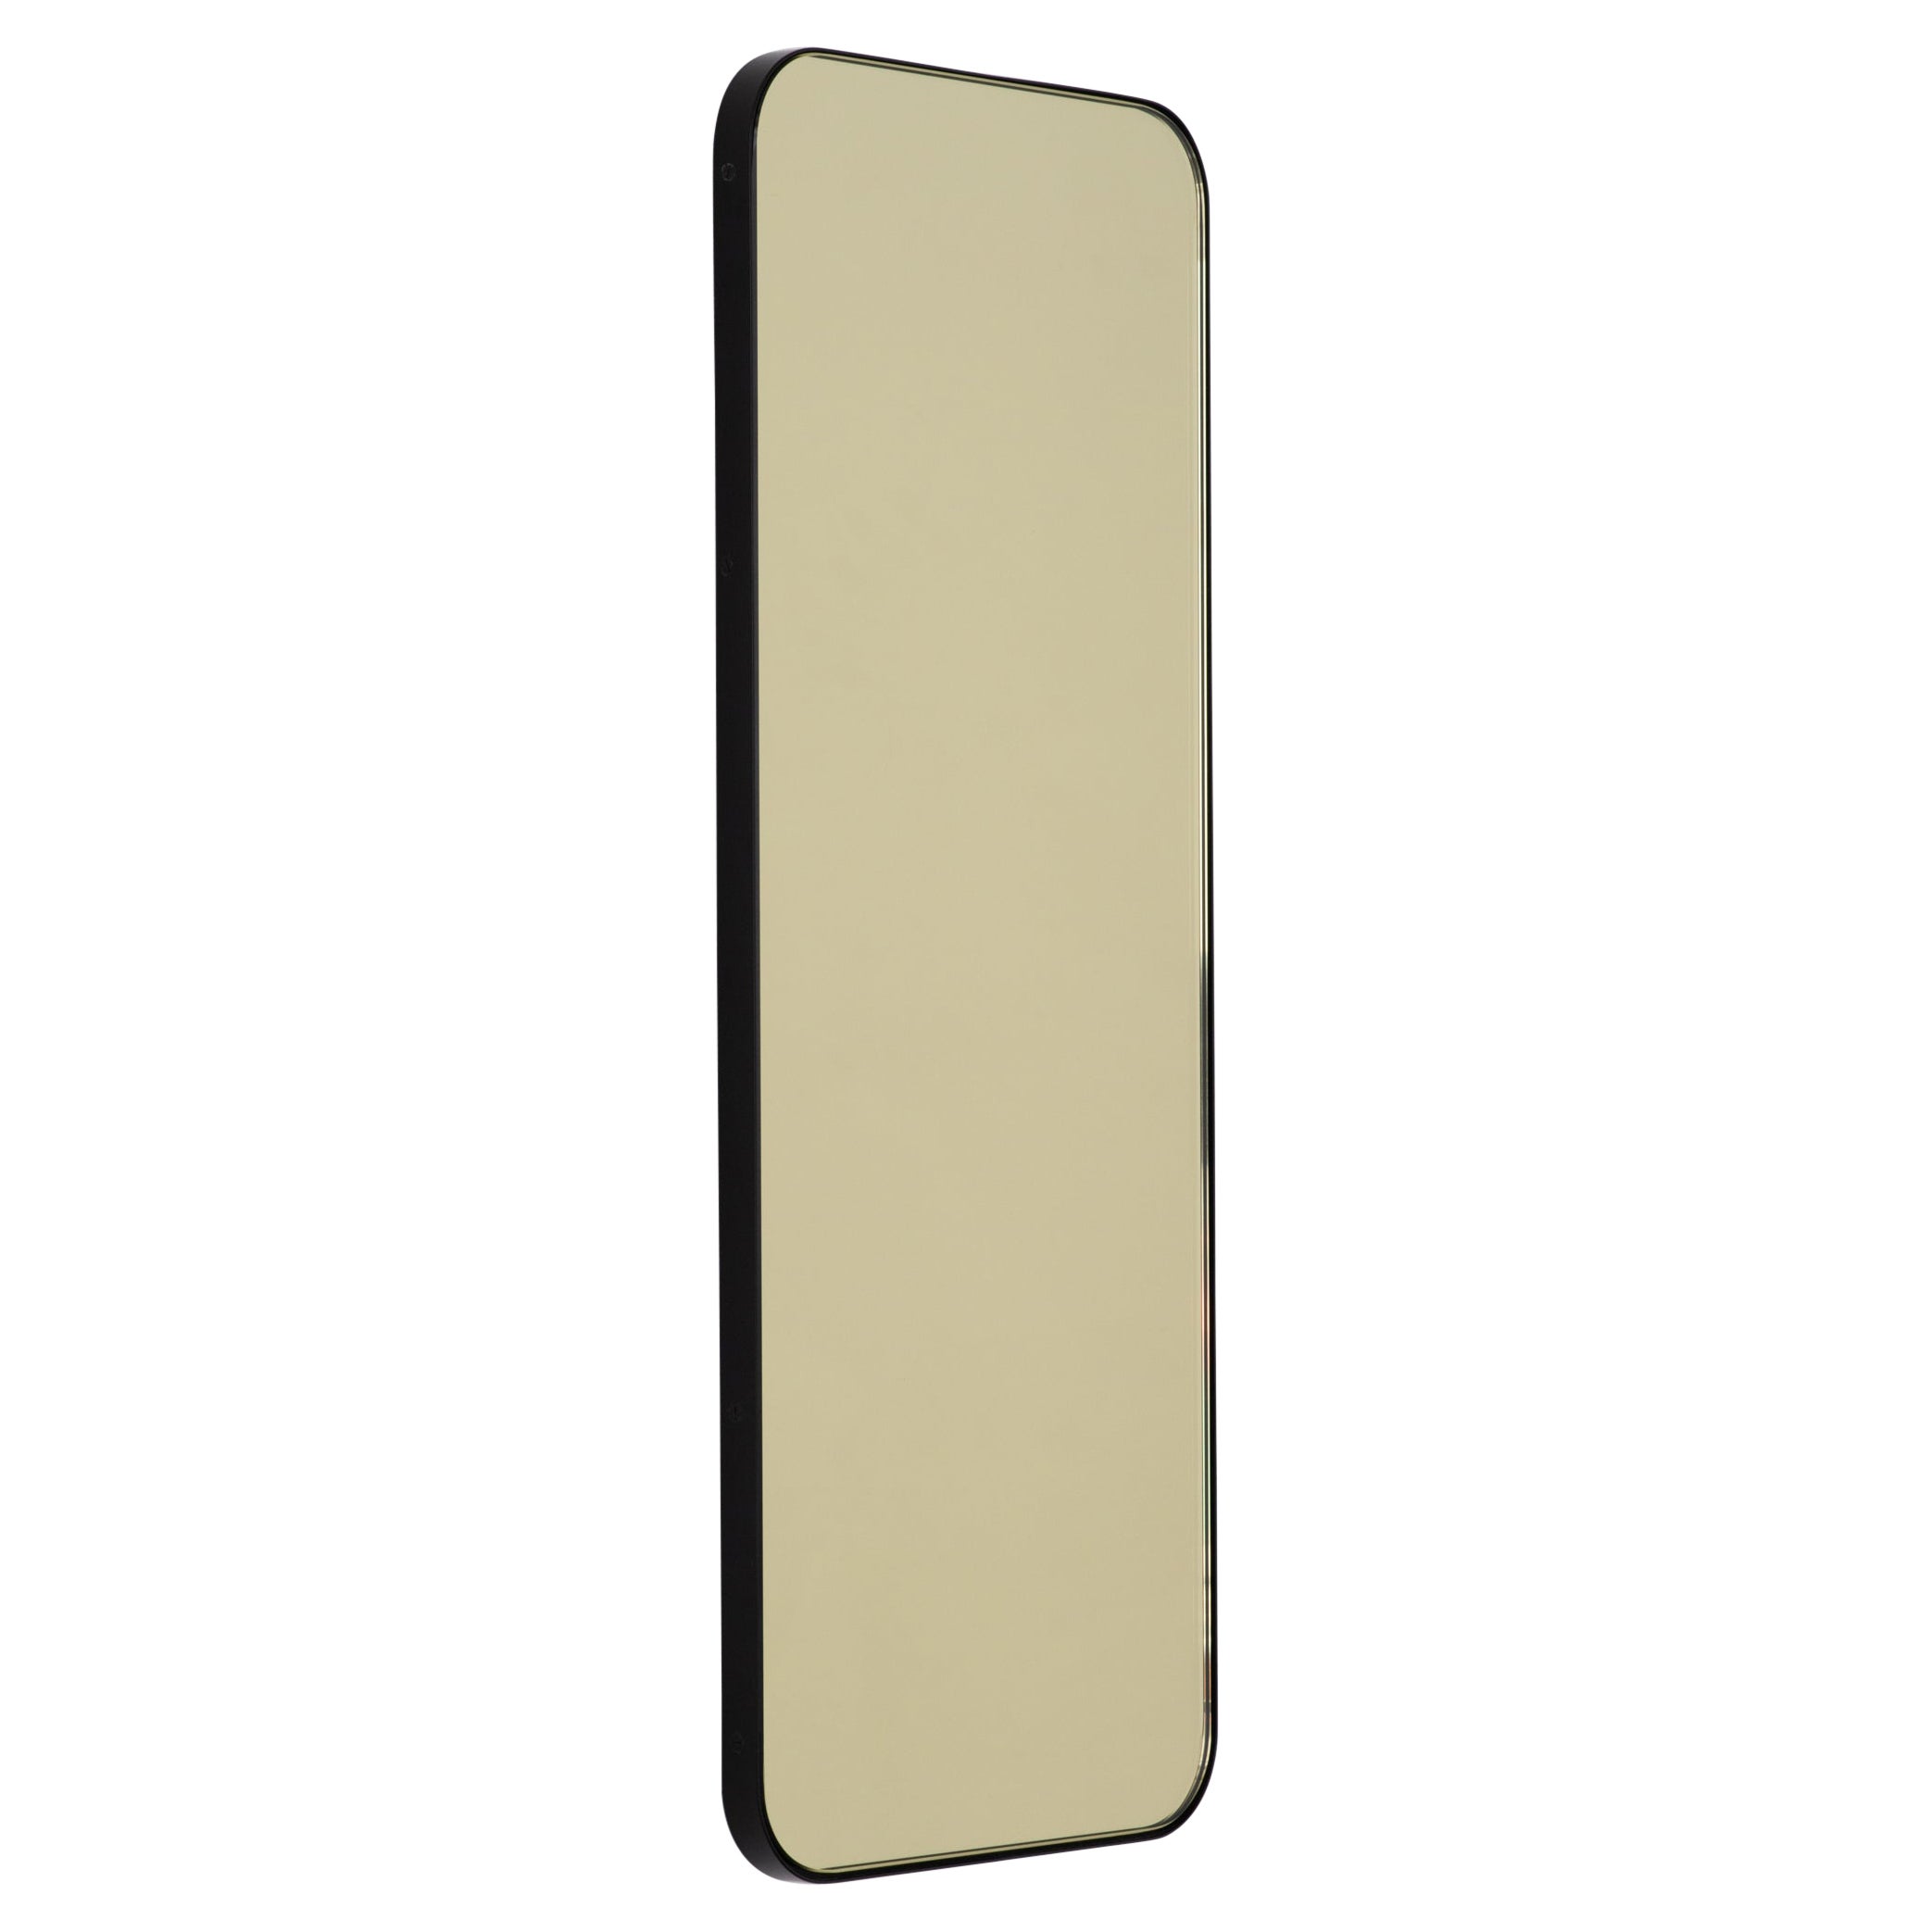 Quadris Gold Tinted Rectangular Wall Mirror with a Black Frame, Medium For Sale